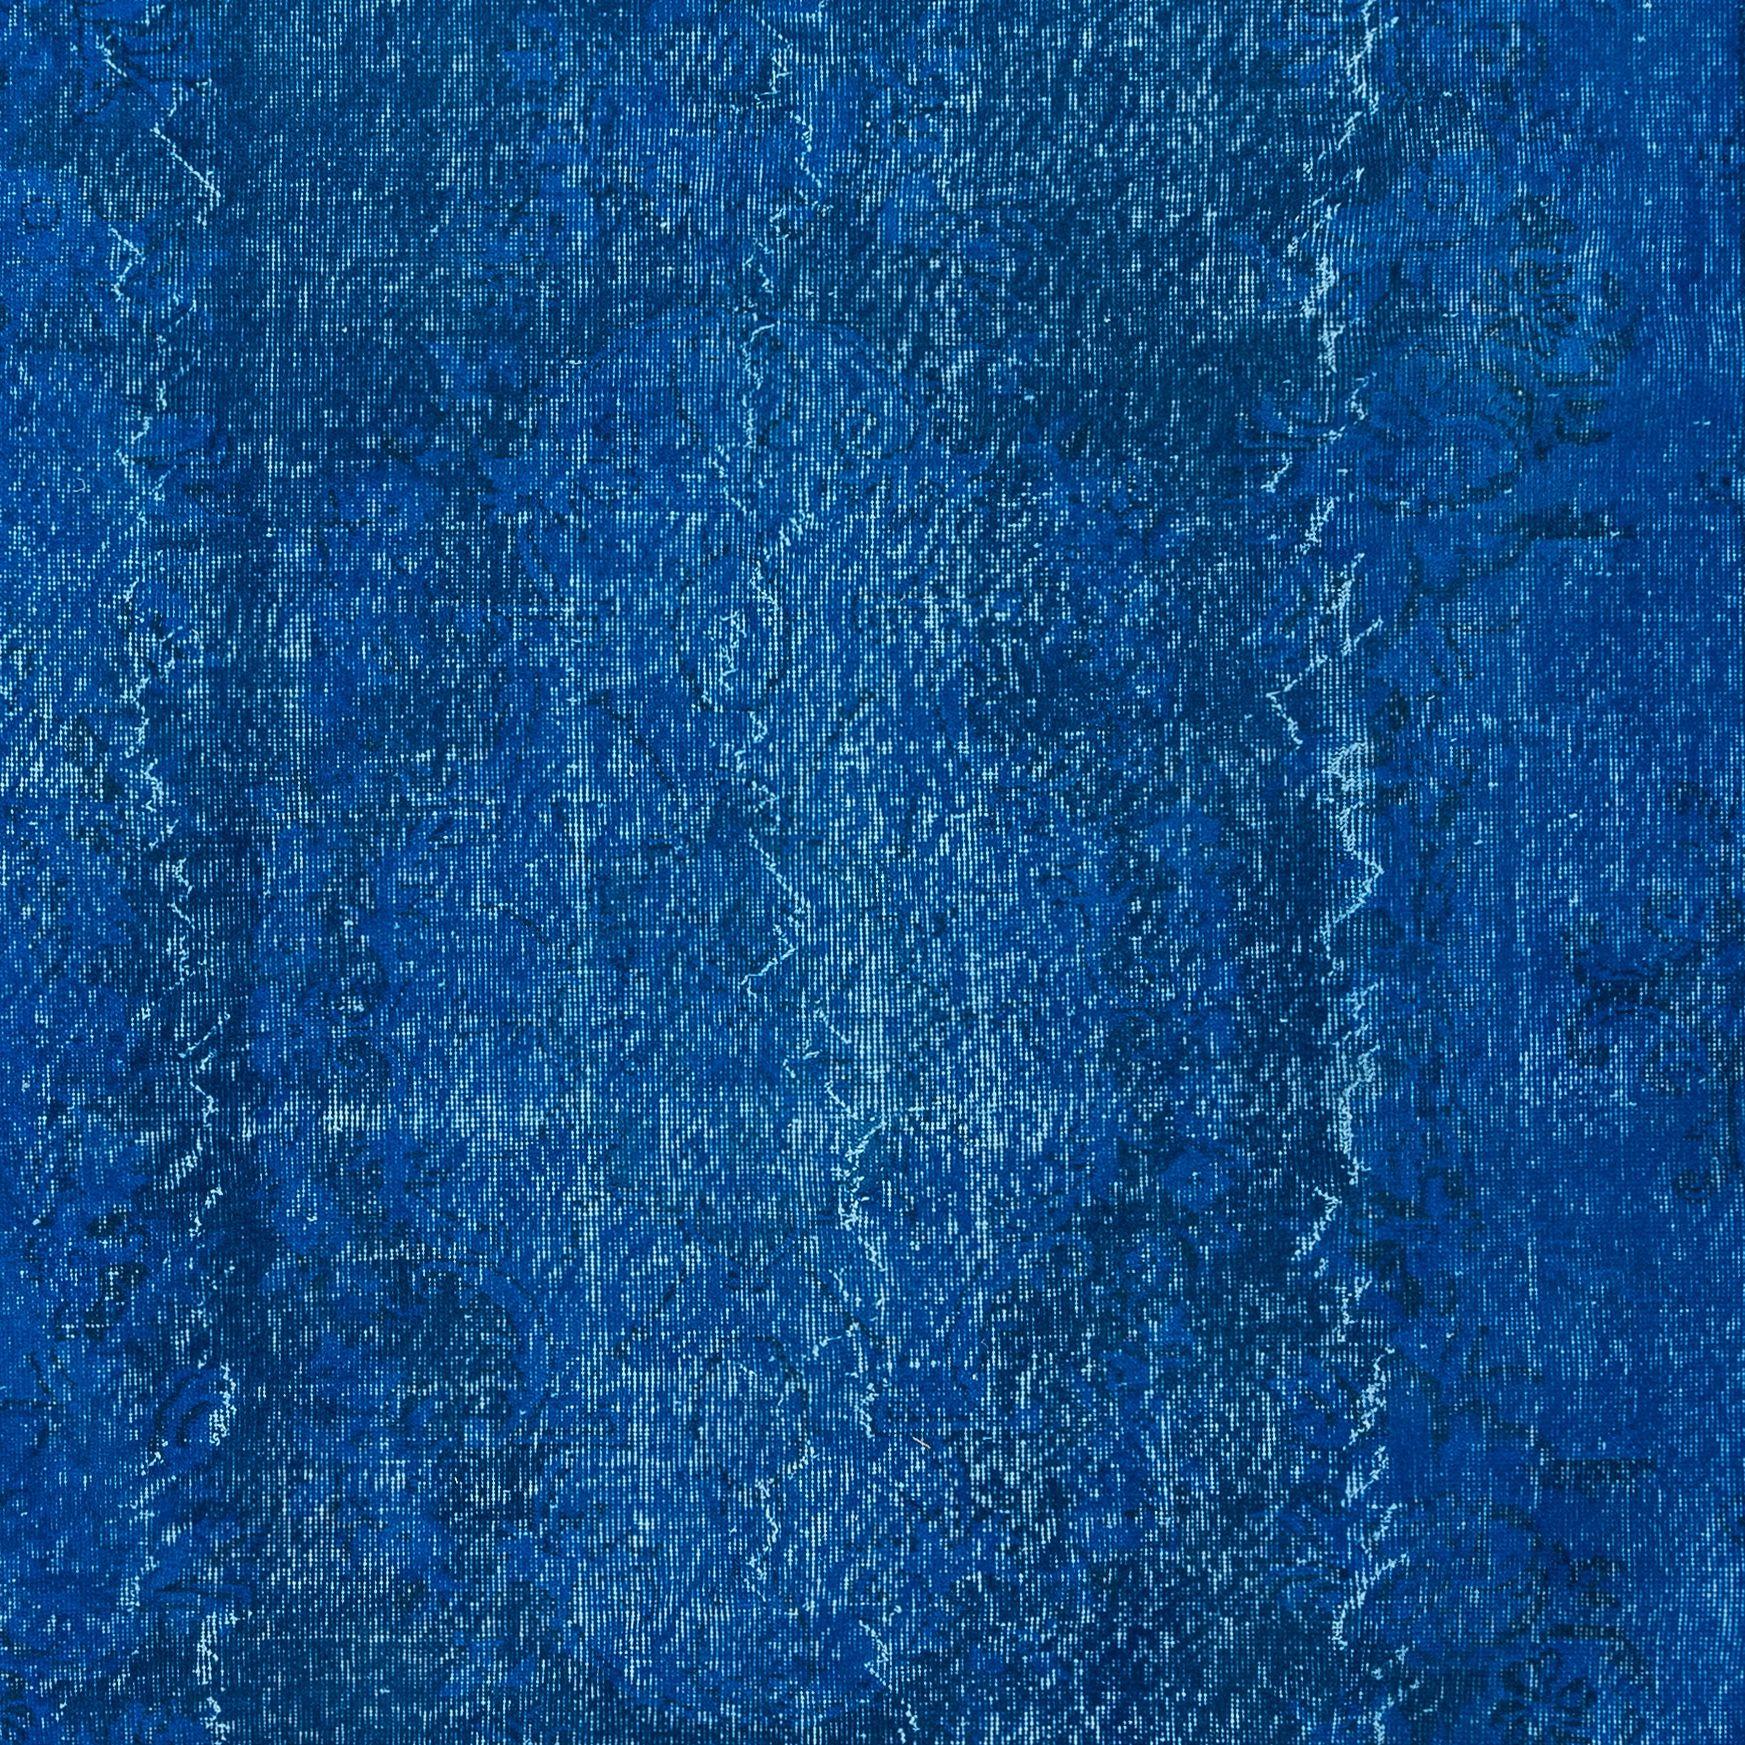 Hand-Woven 6.2x9.8 Ft Hand-Knotted Rug in Sapphire Blue, Modern Turkish Redyed Carpet For Sale